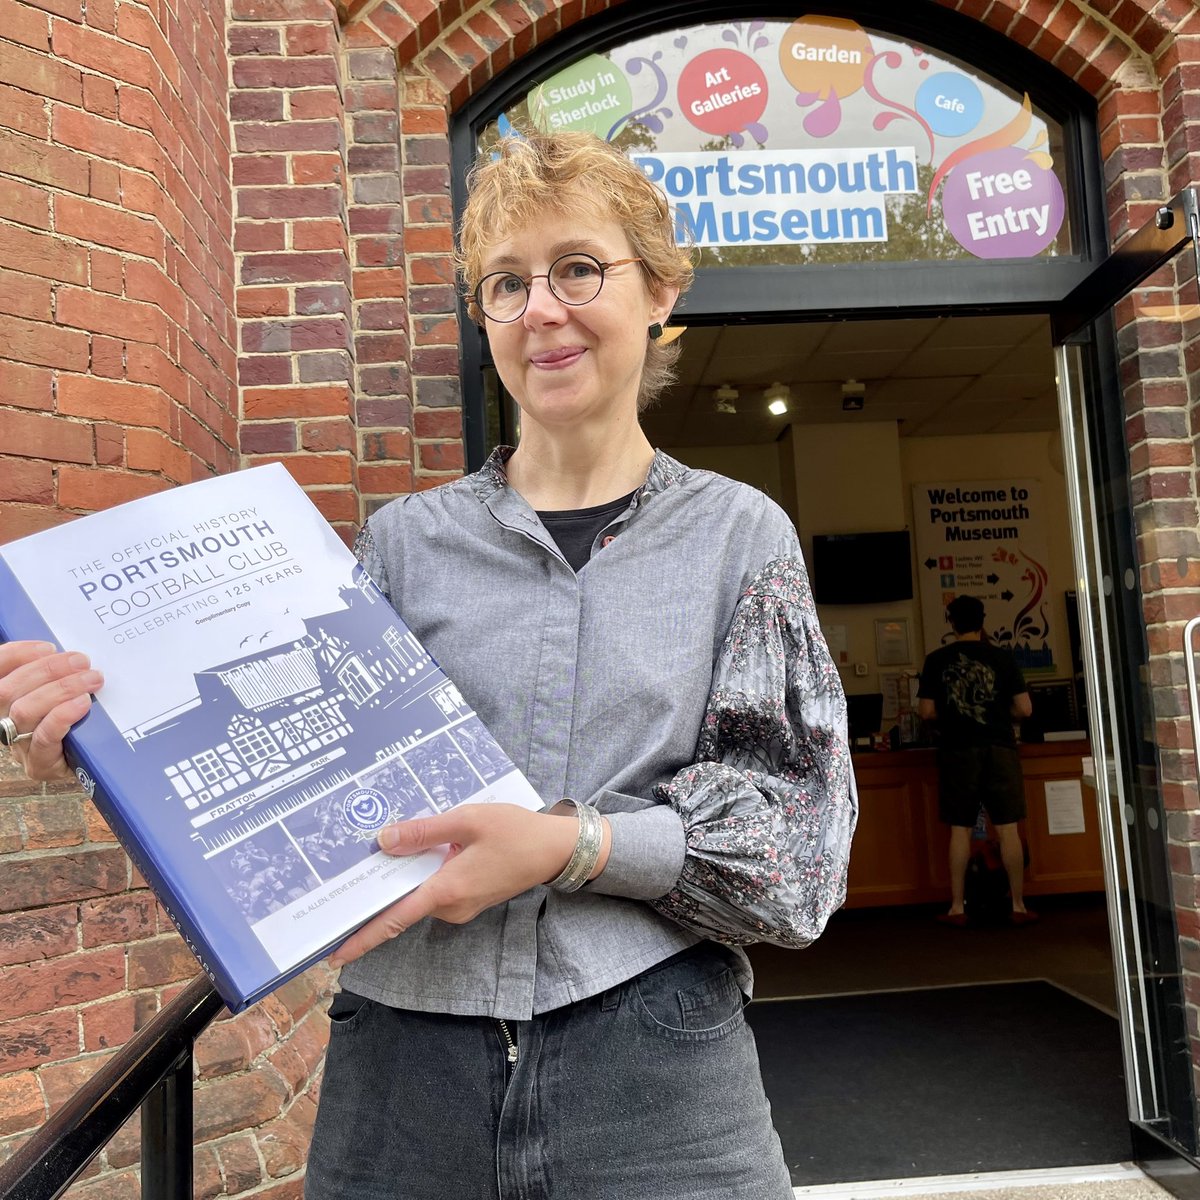 We’re closing in on 300 pre-orders for the @Pompey 125 book ahead of them hitting the shelves from Monday. You can reserve your copy with Ellen & team at @PortsCityMuseum either in their shop or by phone: 023 9283 4779 Take a look at their football collection while you’re there!o